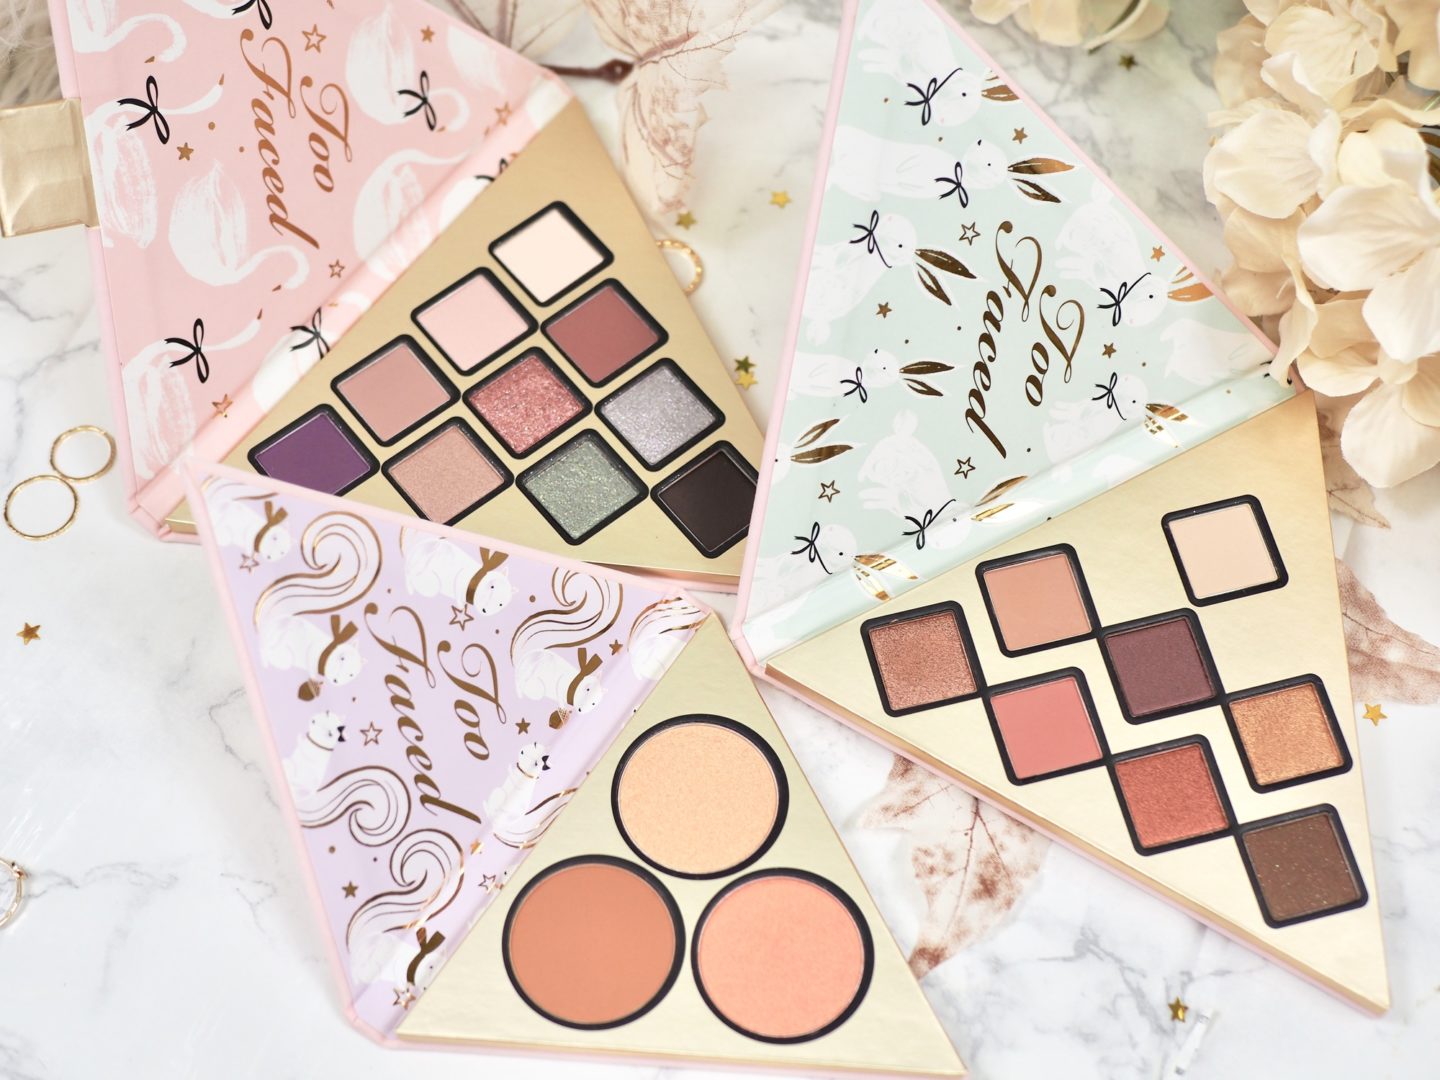 Eyeshadow Palette with 18 eyeshadow shades by Too Faced. Enter to win!